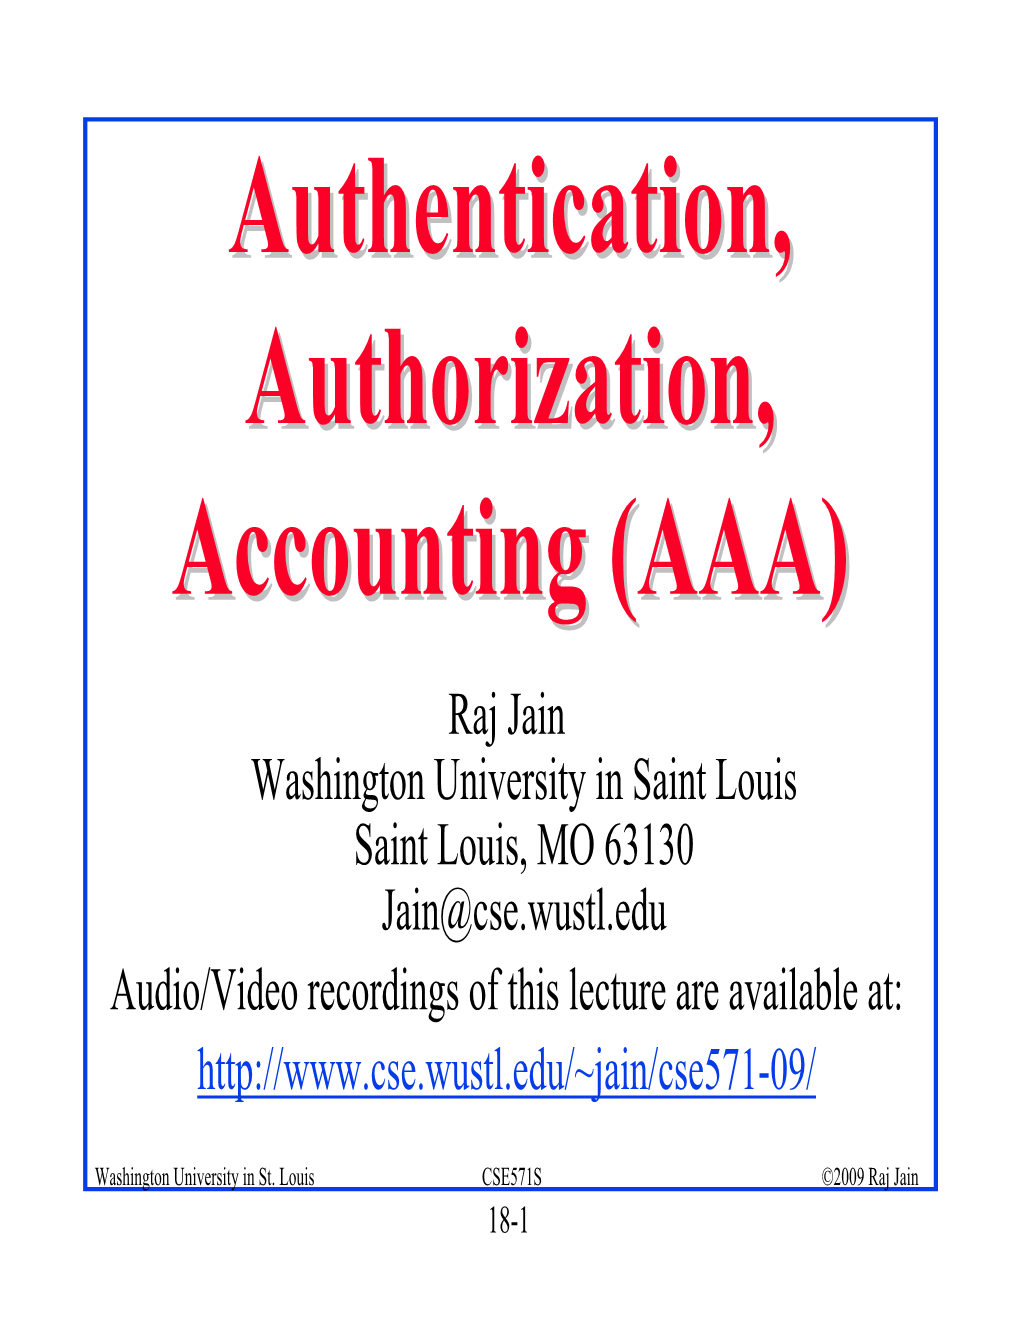 Authentication, Authorization, Accounting (AAA)